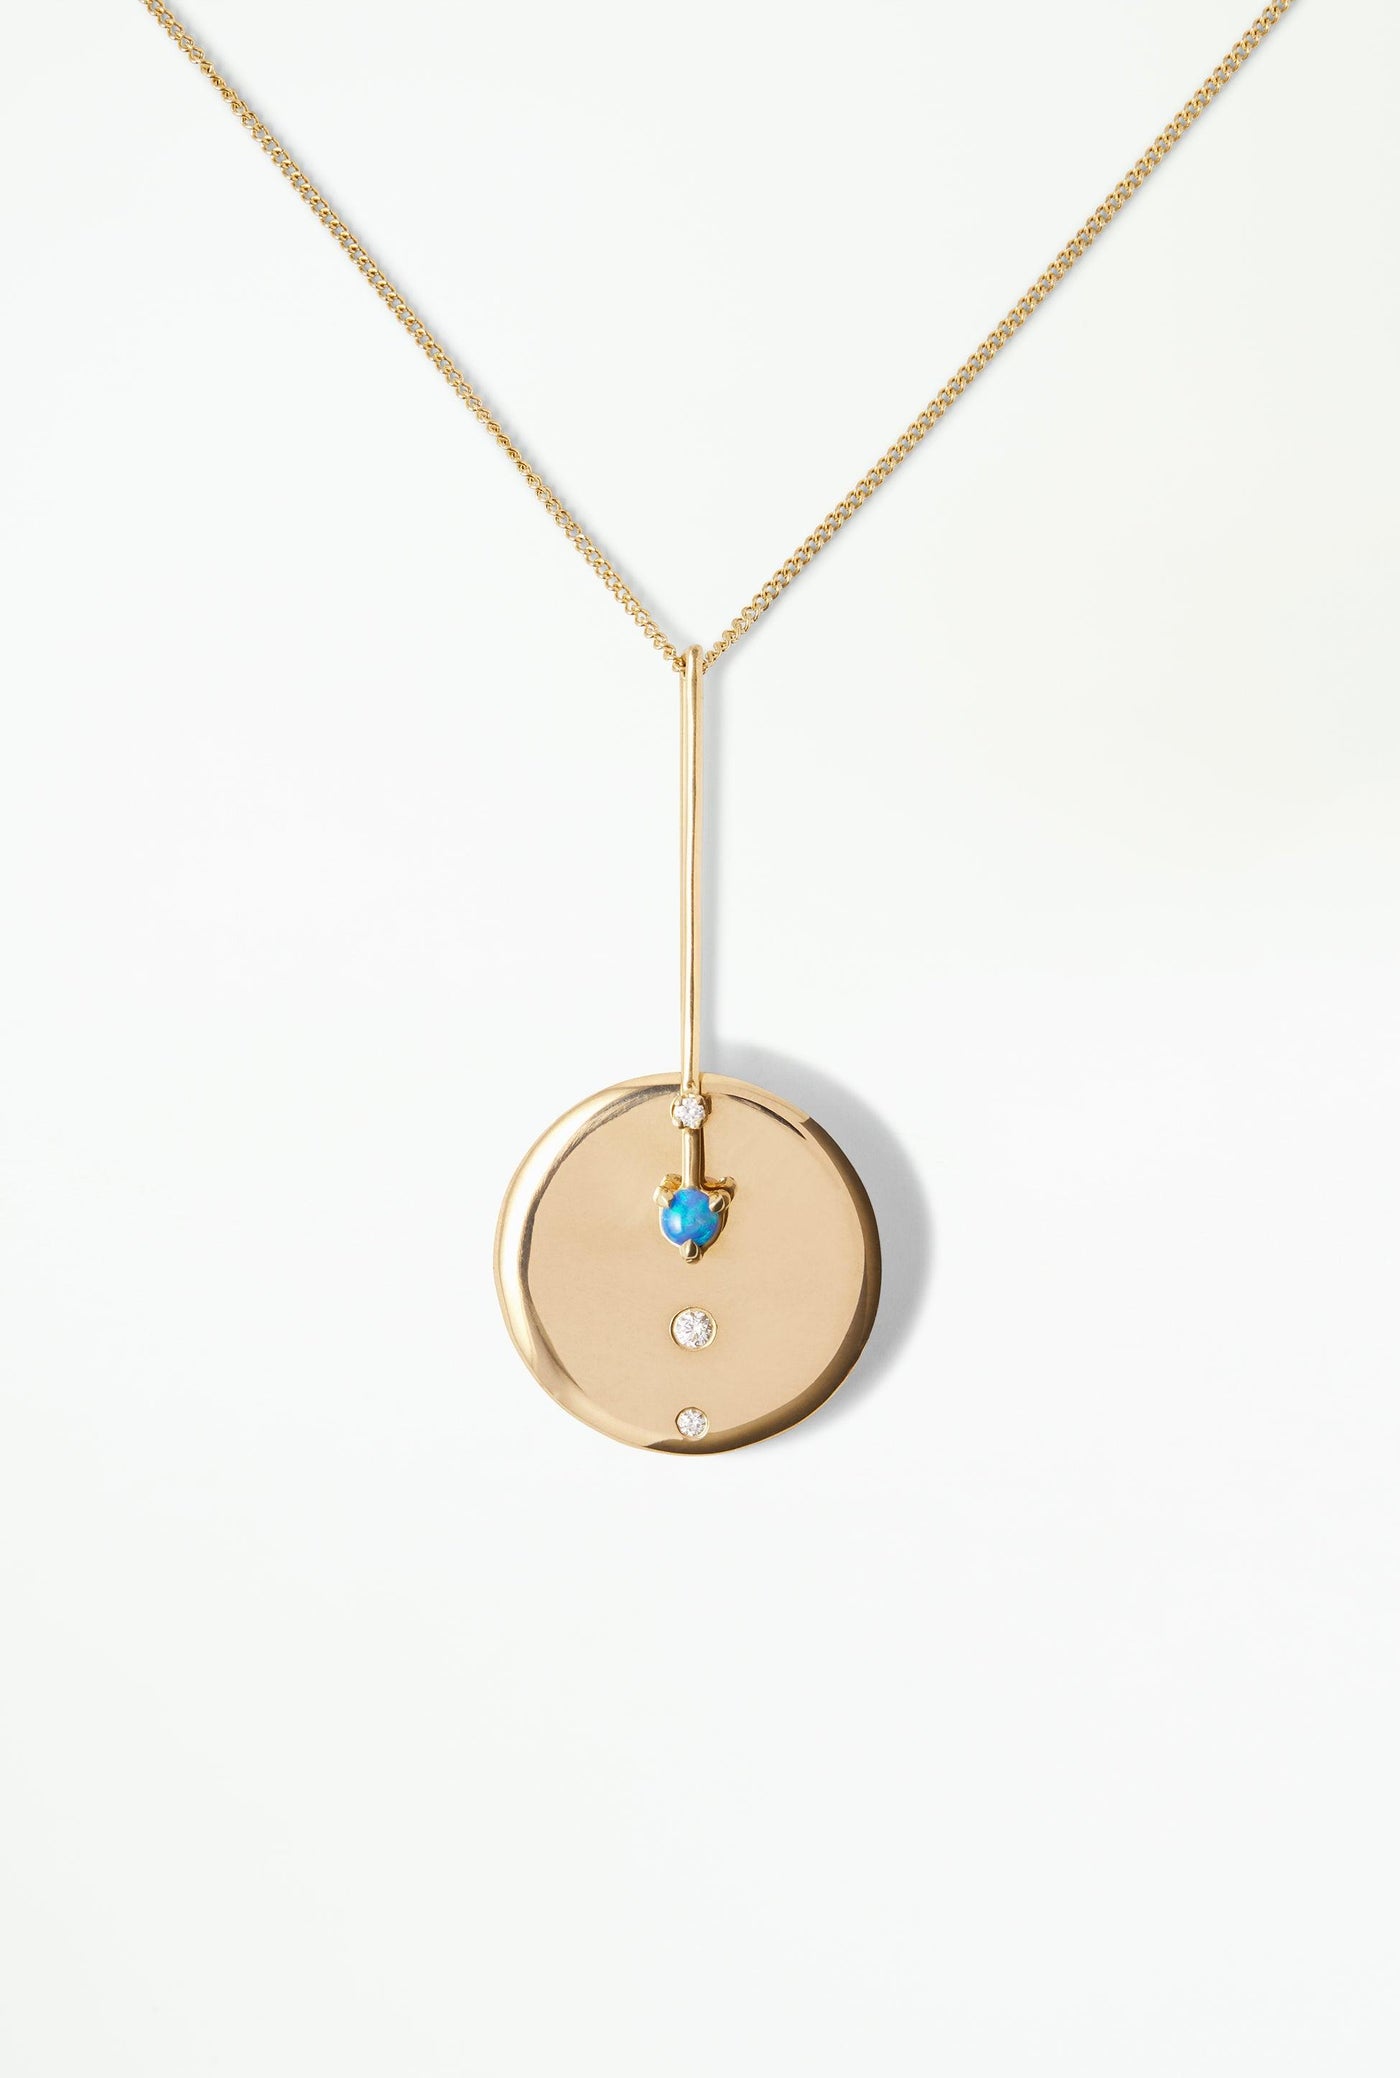 Spinning Medallion Opal and Diamond Necklace - WWAKE